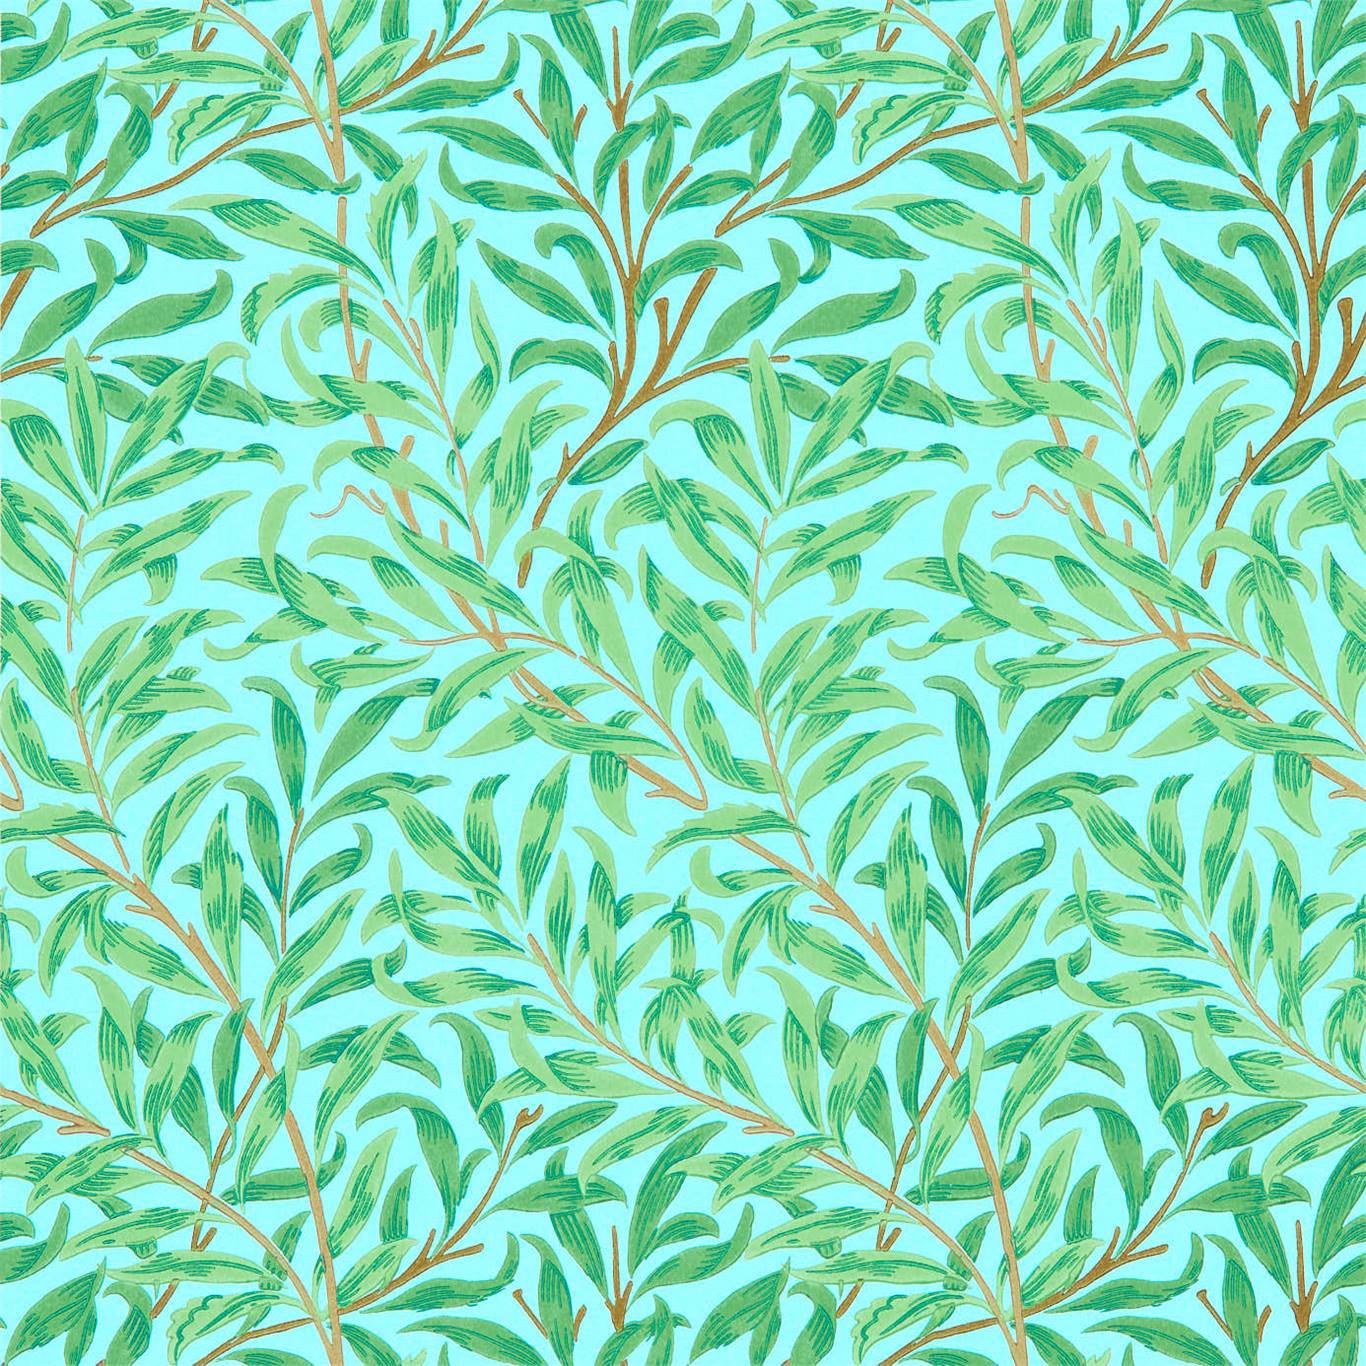 William Morris Willow Bough Wallpaper DBPW216948 by Morris & Co